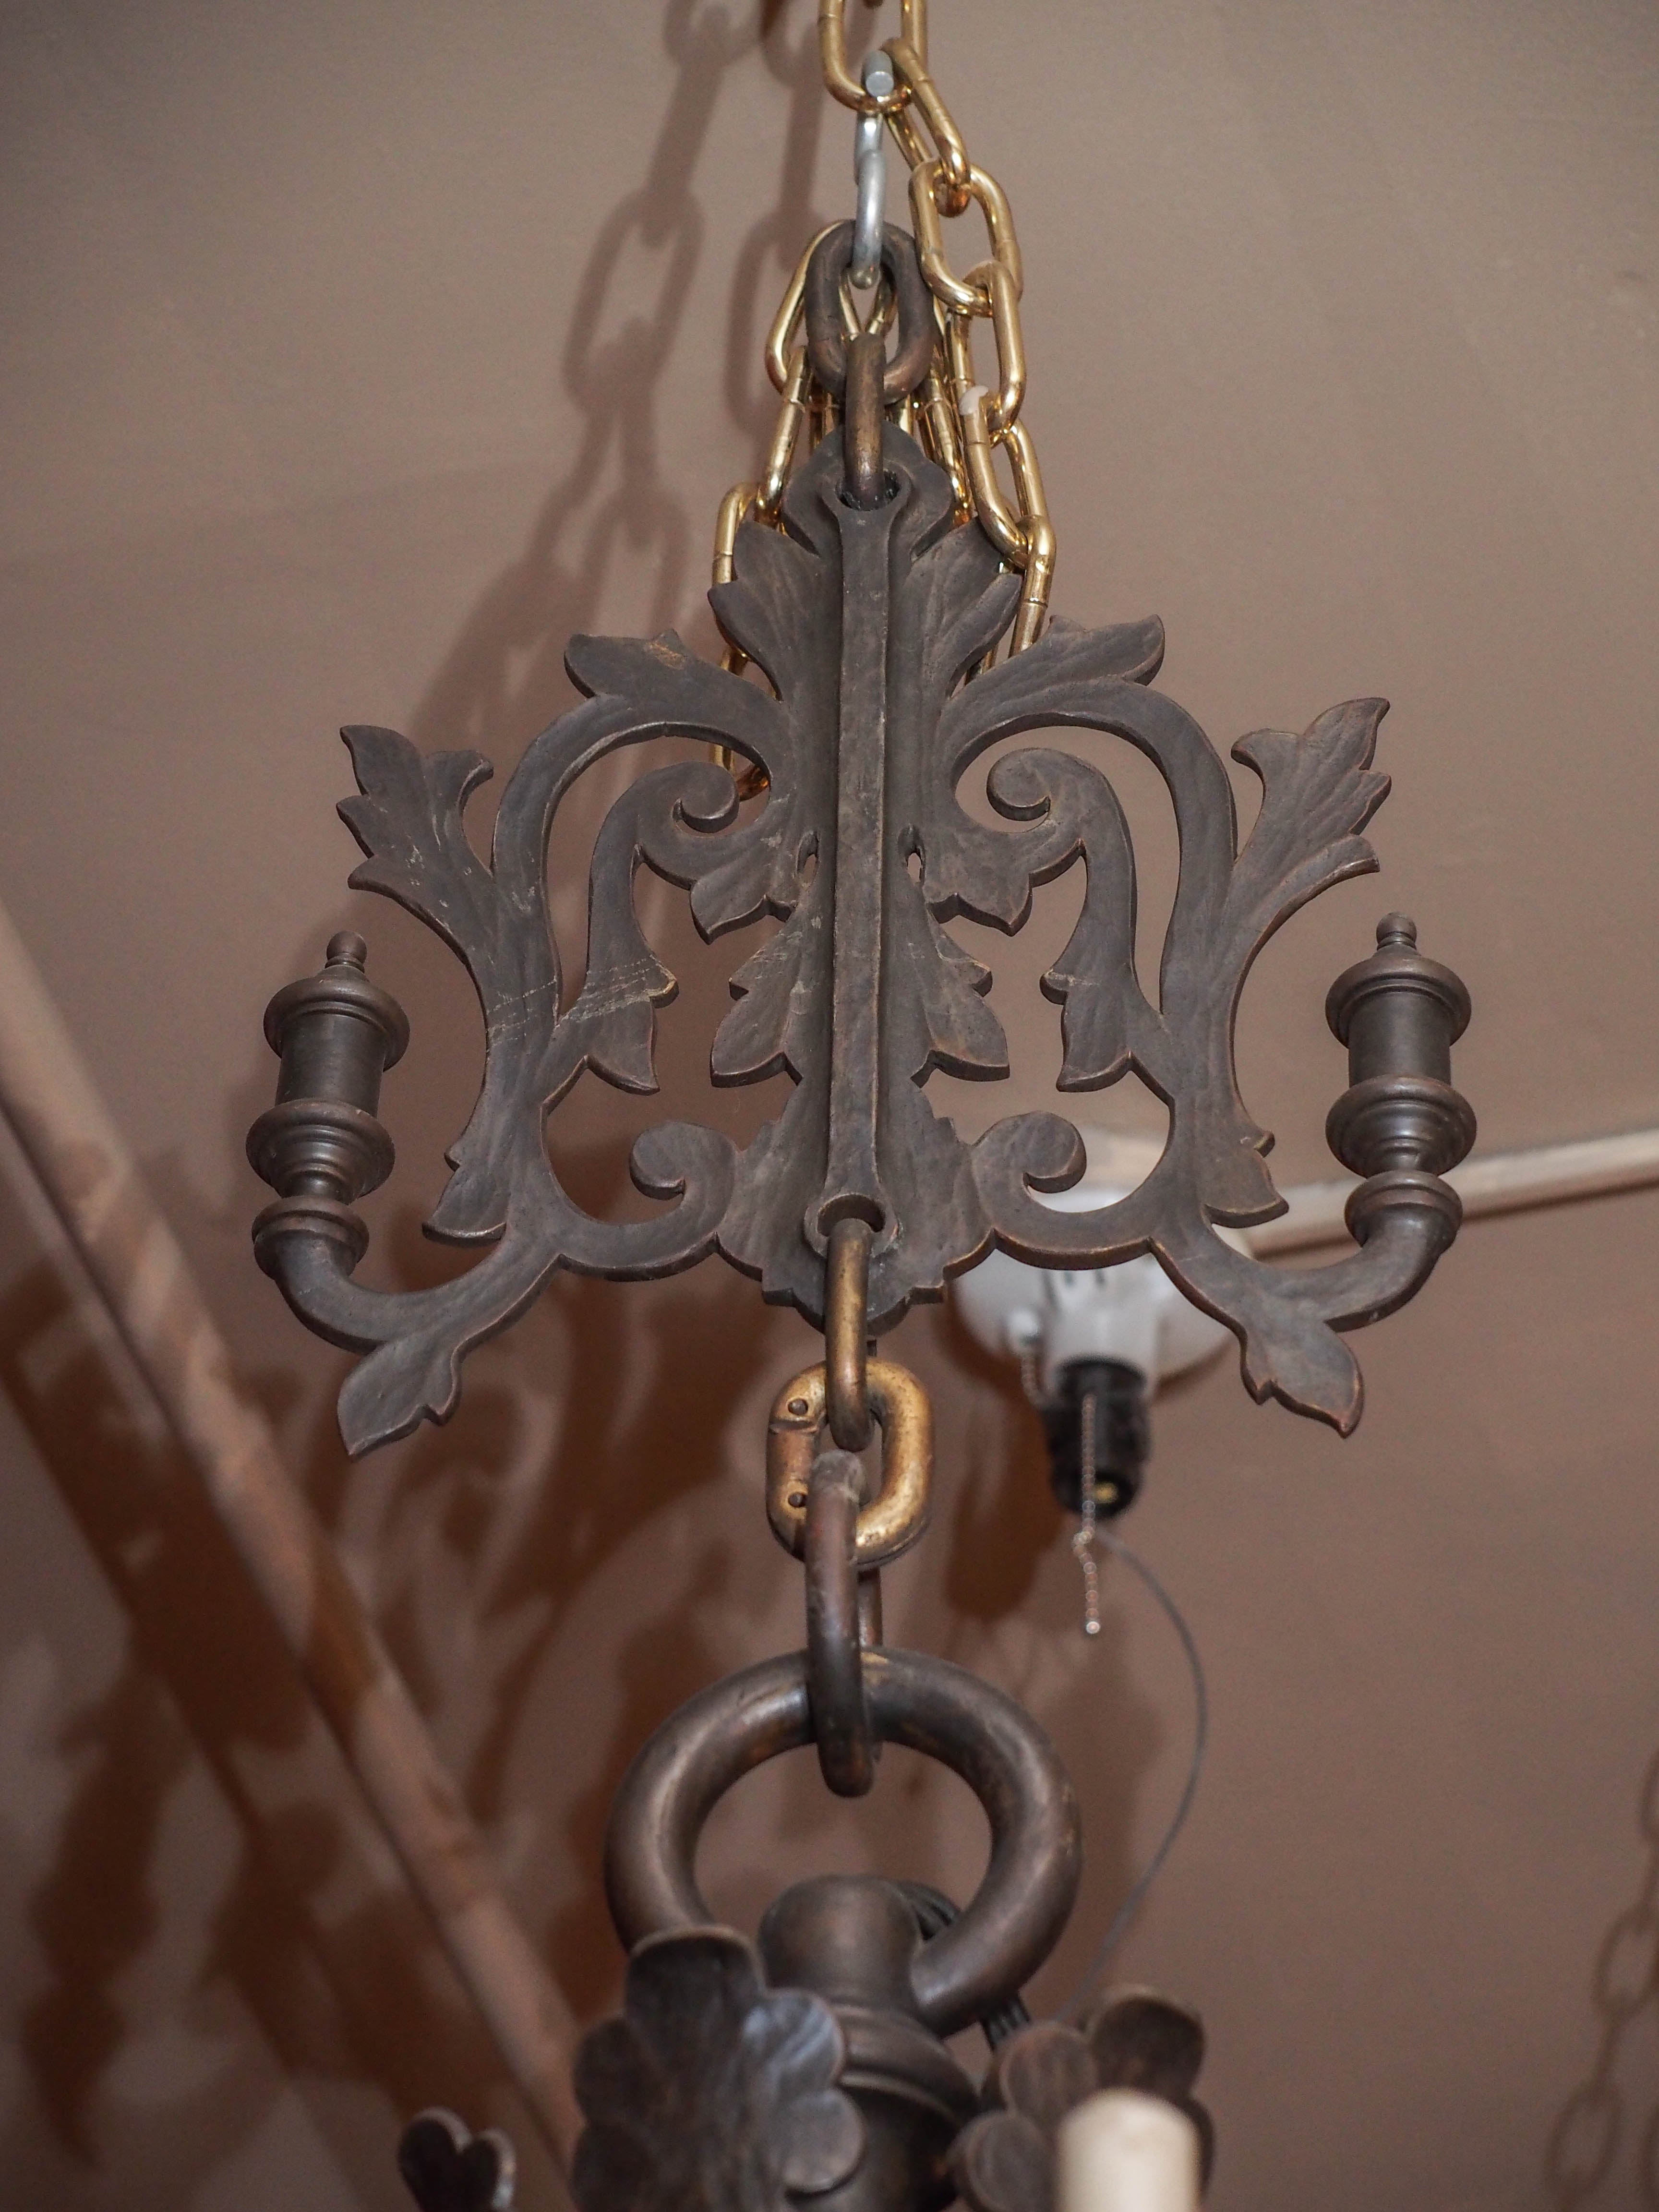 Antique Dutch bronze Renaissance chandelier, circa 1929. This chandelier is from a grand manor house.